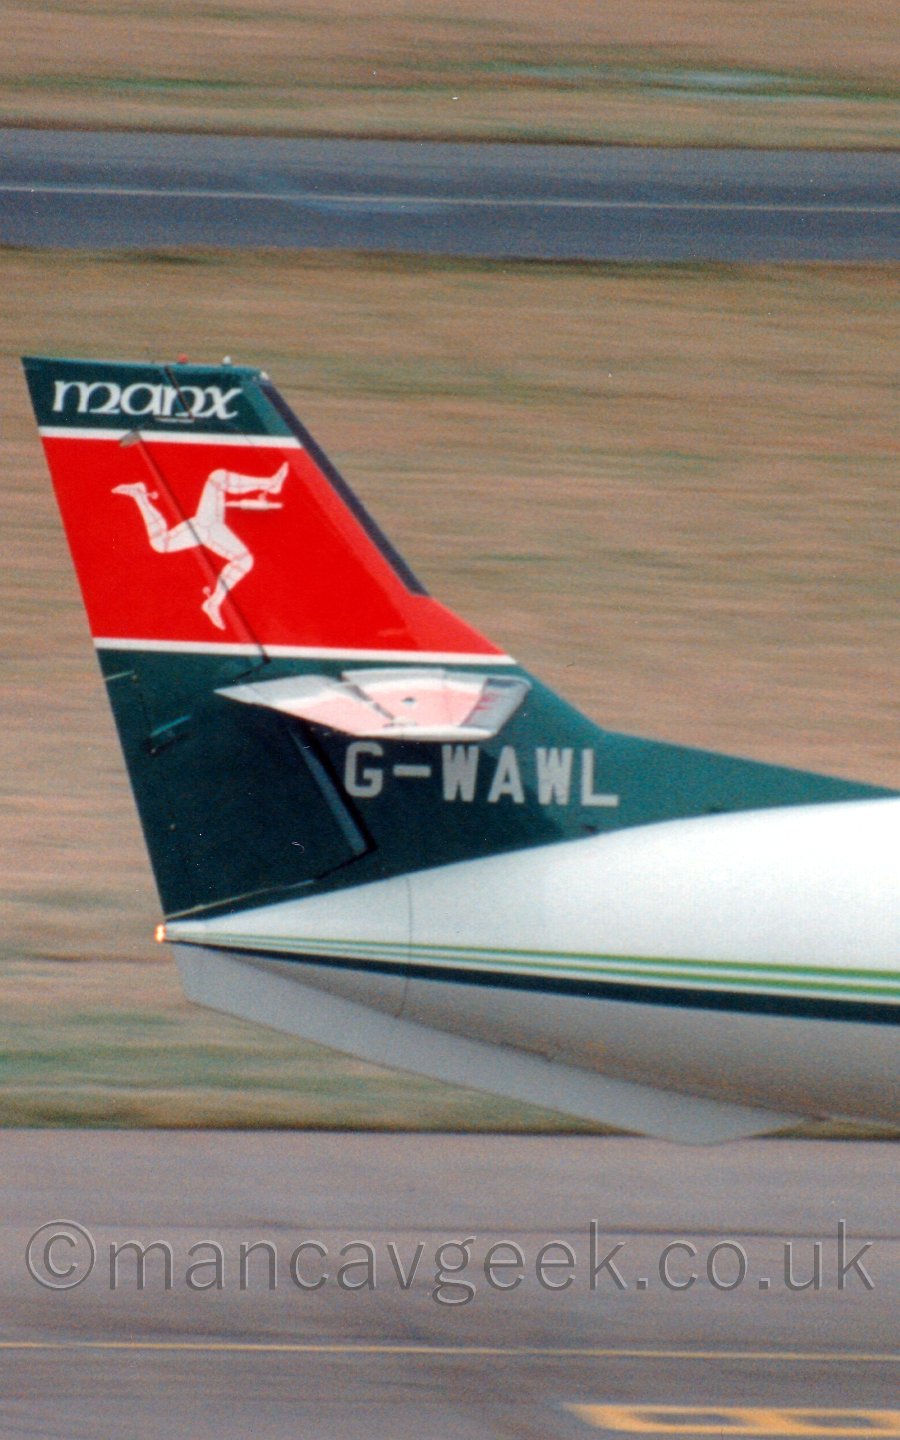 Close up of the tail of a twin propellor-engined airliner taxiing from left to right. the plane is mostly white, with a dark and light green stripe running along the body. The tail is a dark green, with a thick red stripe in the middle carrying 3 bent armoured legs all connected at the hip and Running in a circle The word "Manx" is painted on the top of the tail in white, with the registration "G-WAWL" at the base. In the background, yellowing grass leads off into the distance.